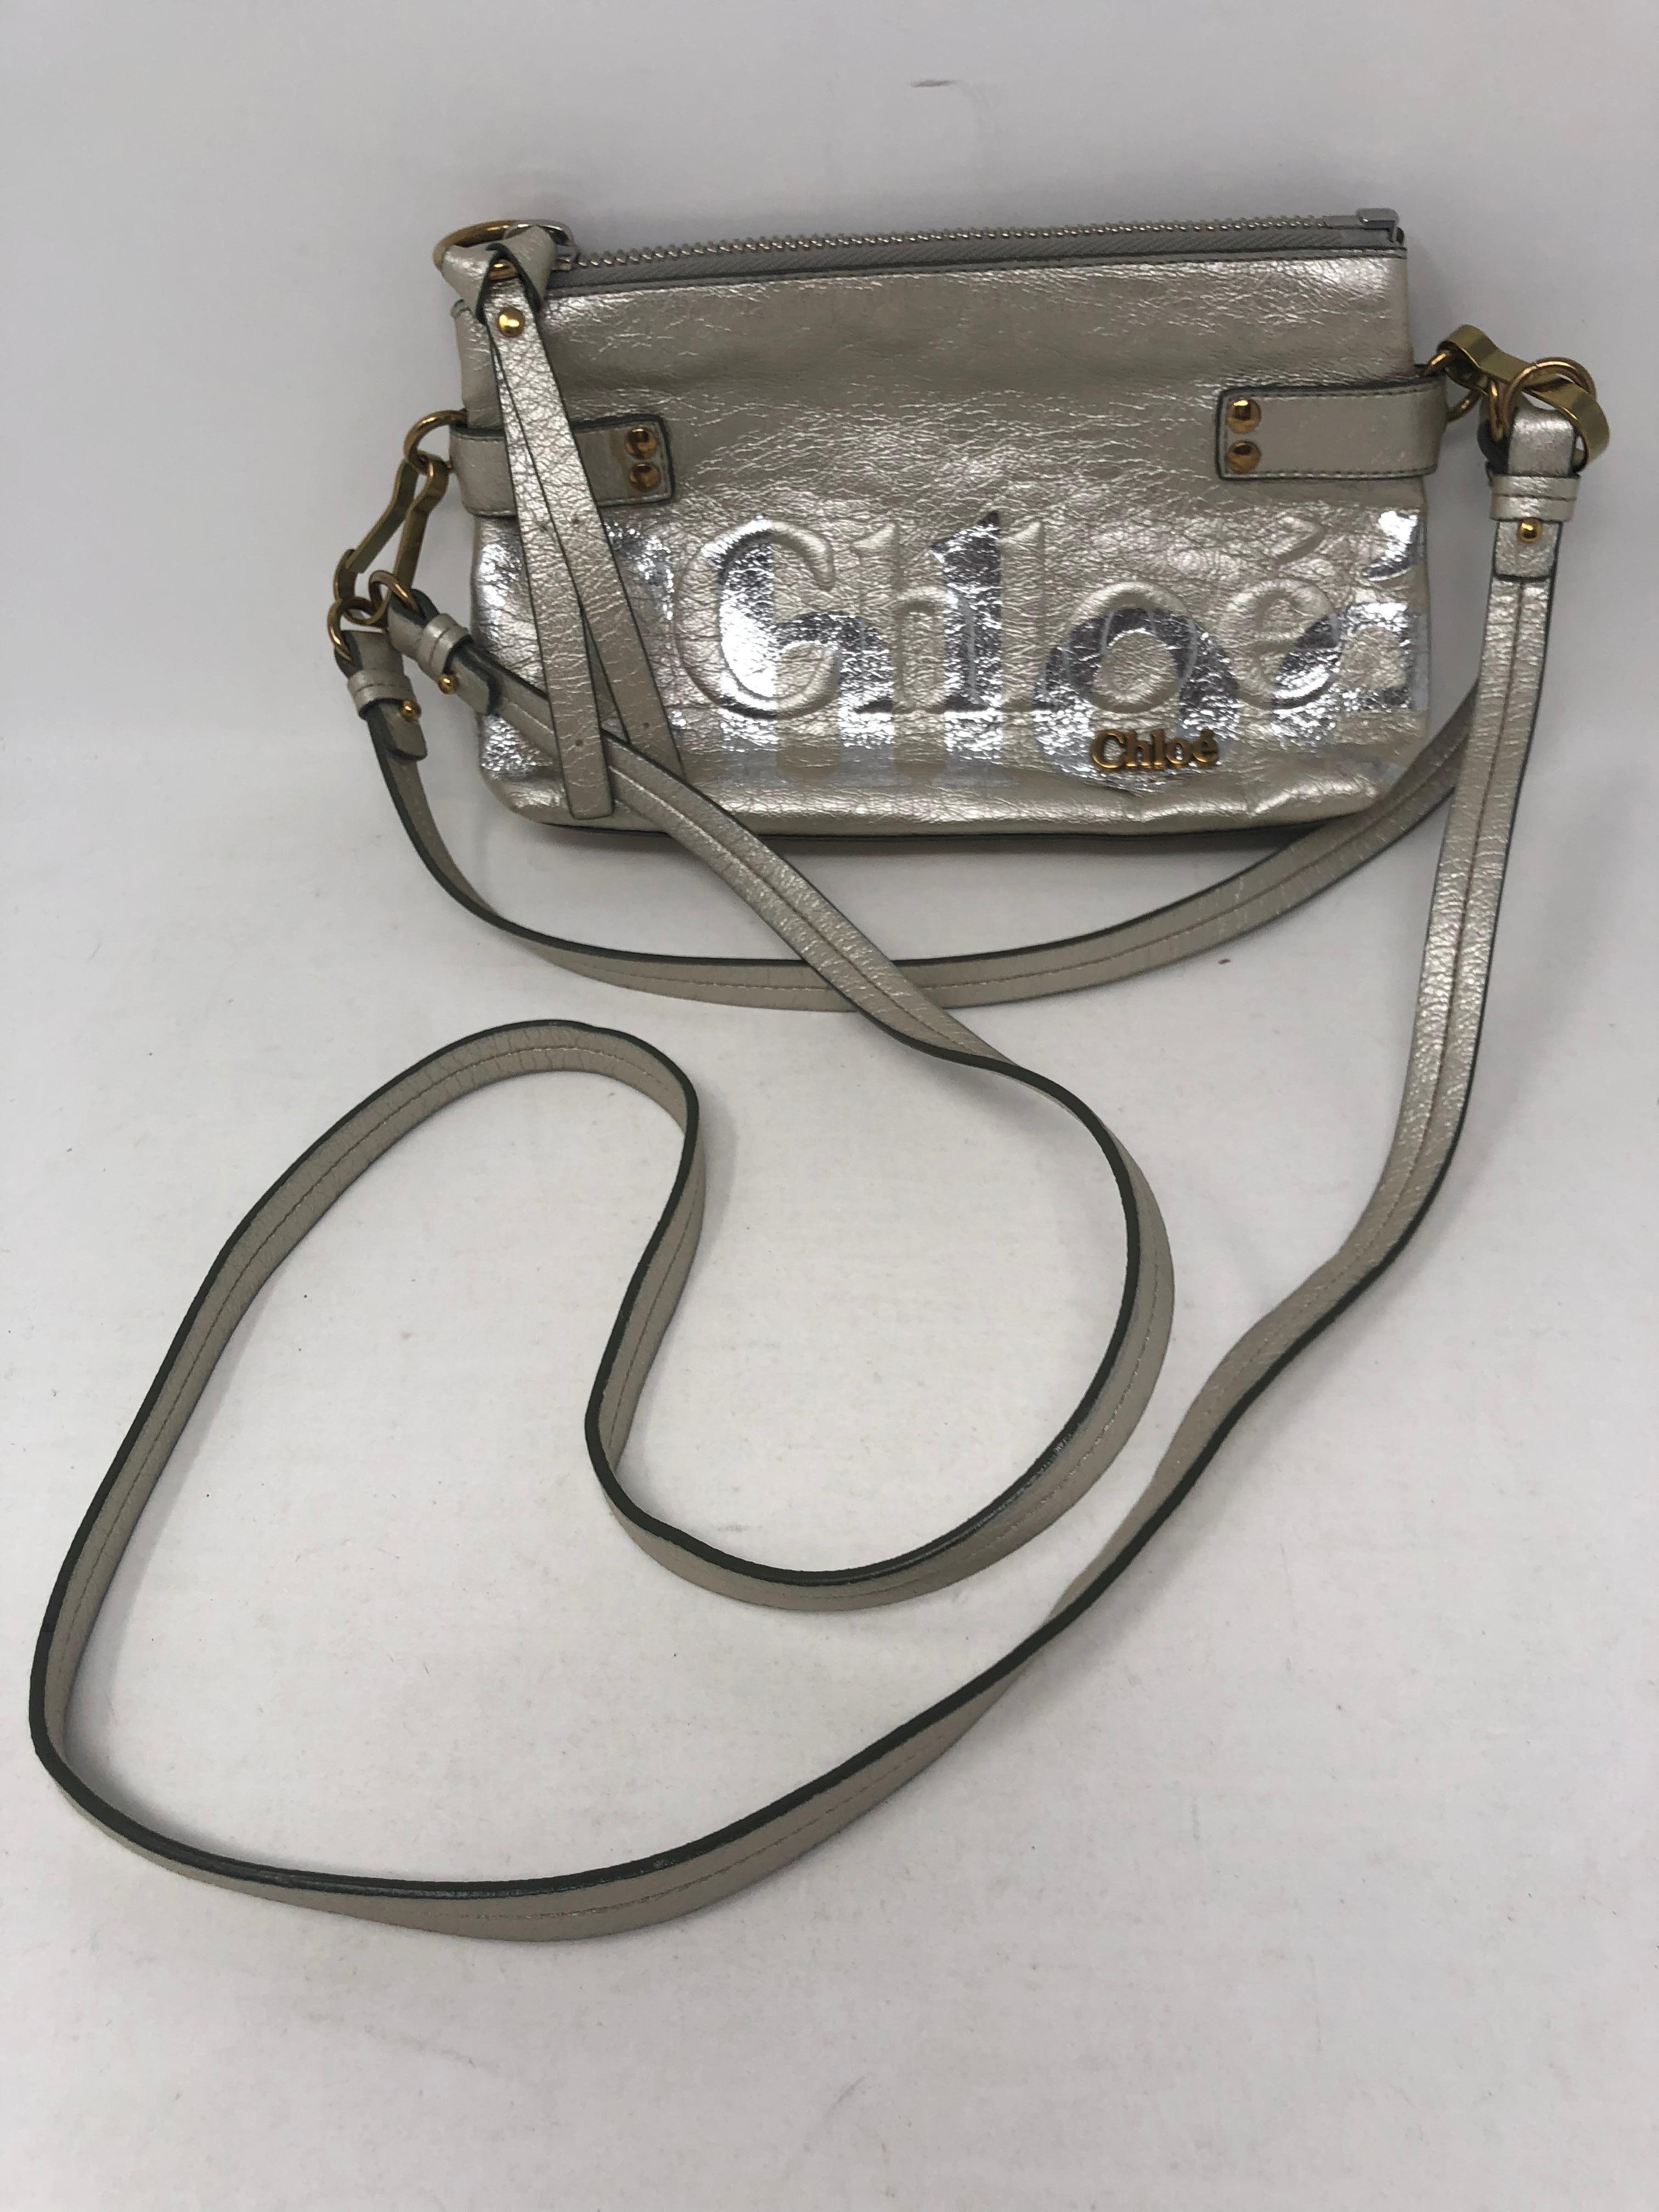 Chloe Silver Leather Crossbody. Removable long strap, can be worn as a shoulder bag or clutch. Like new condition. Silver metallic color. 